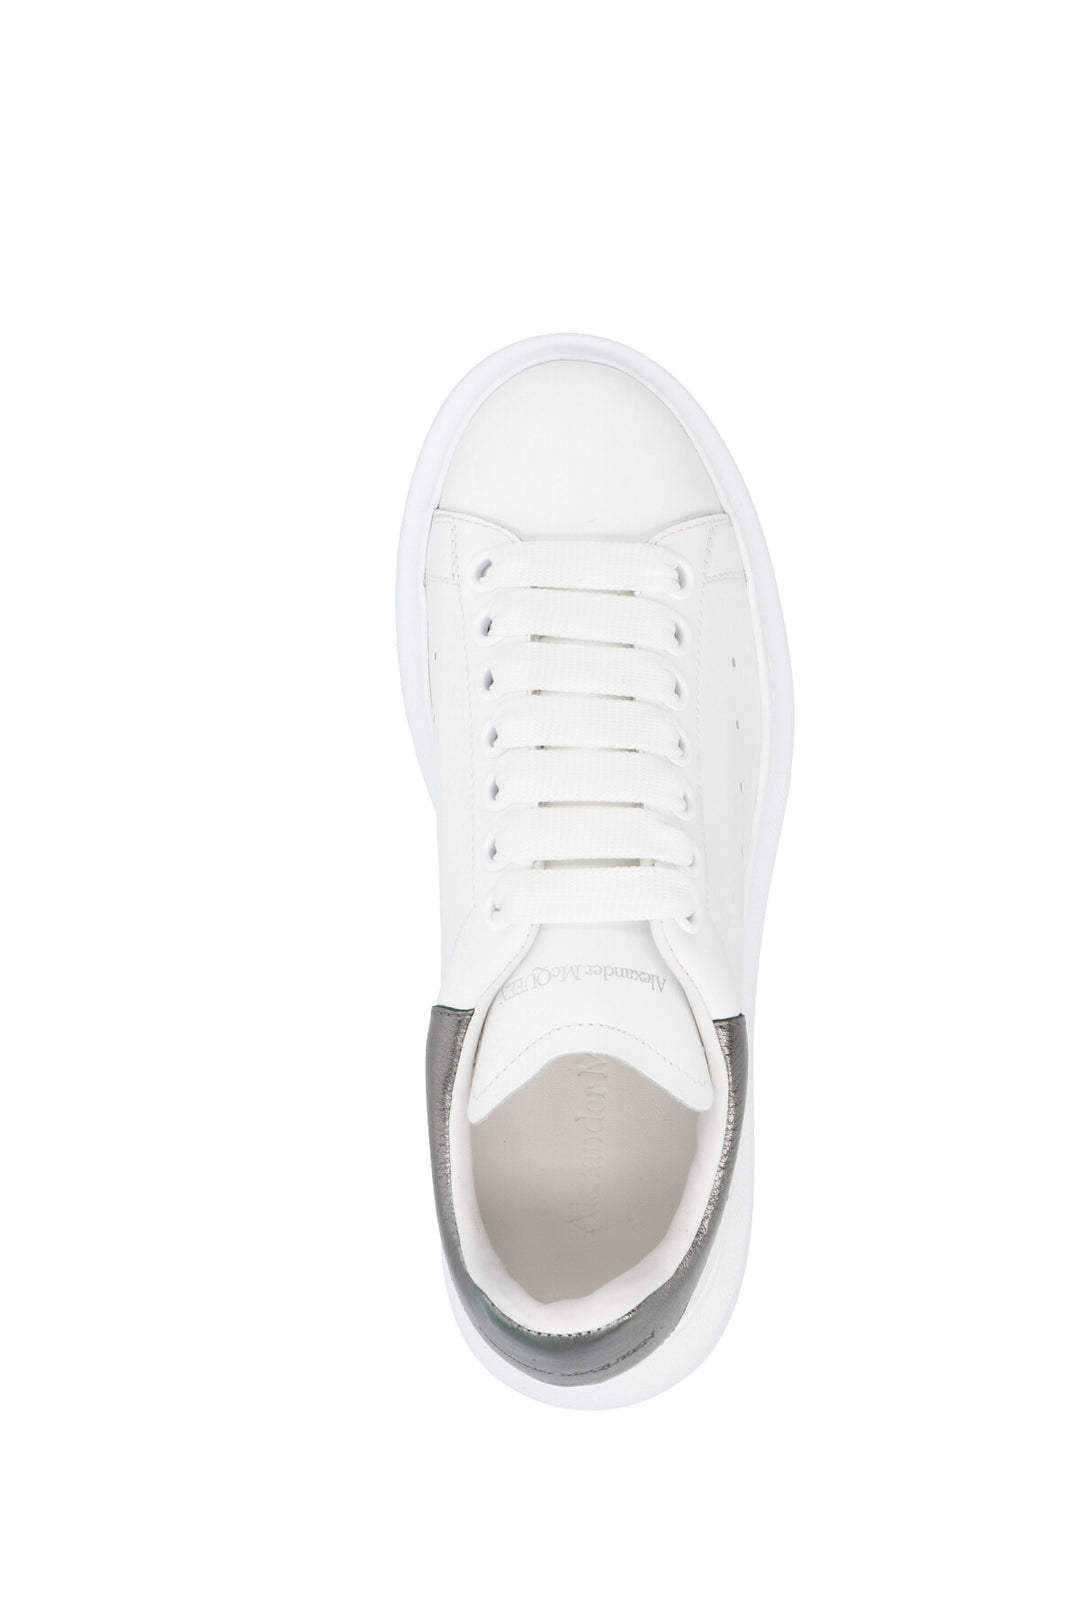 'Oversize sole’ Sneakers Silver